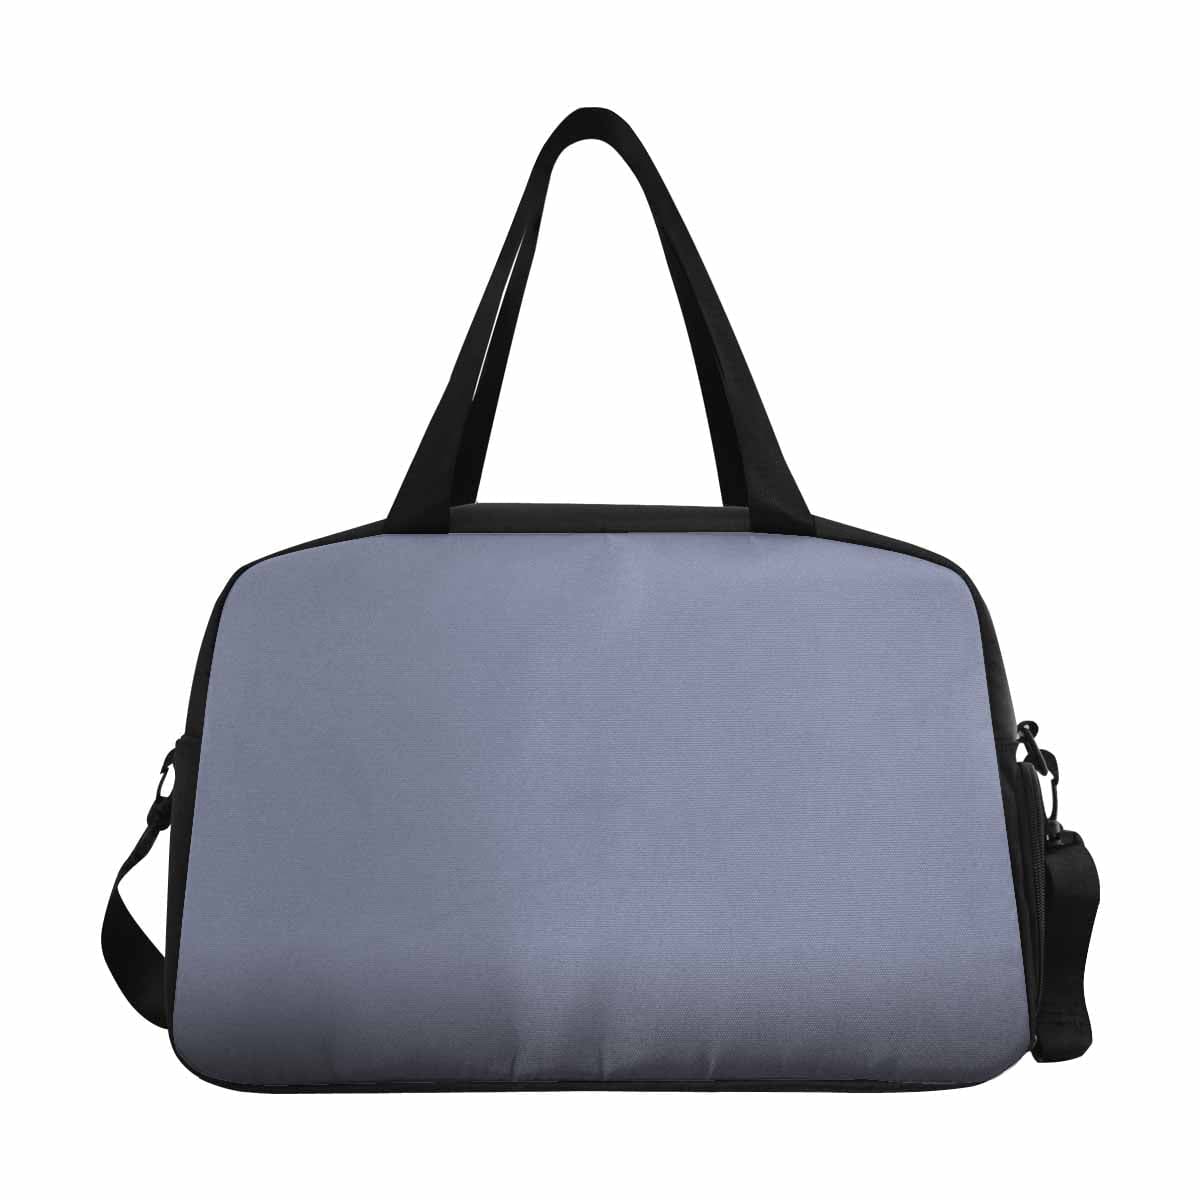 Cool Gray Tote And Crossbody Travel Bag - Bags | Travel Bags | Crossbody